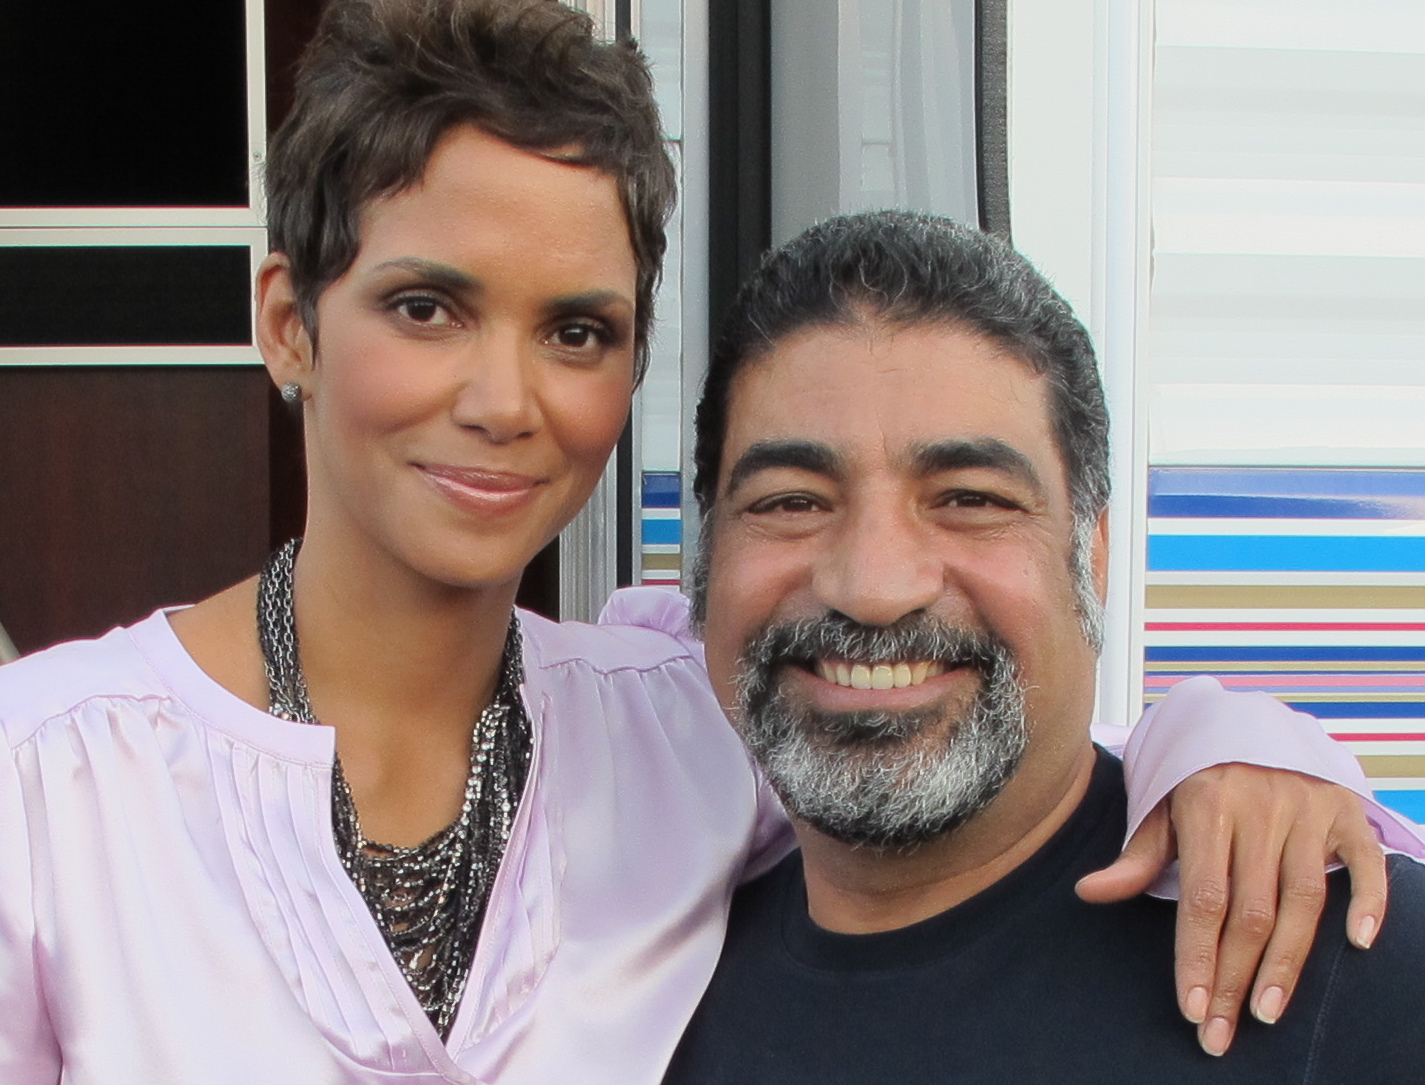 on the set of Movie 43,Sayed Badreya and Oscar Winner Actress Halle Barry